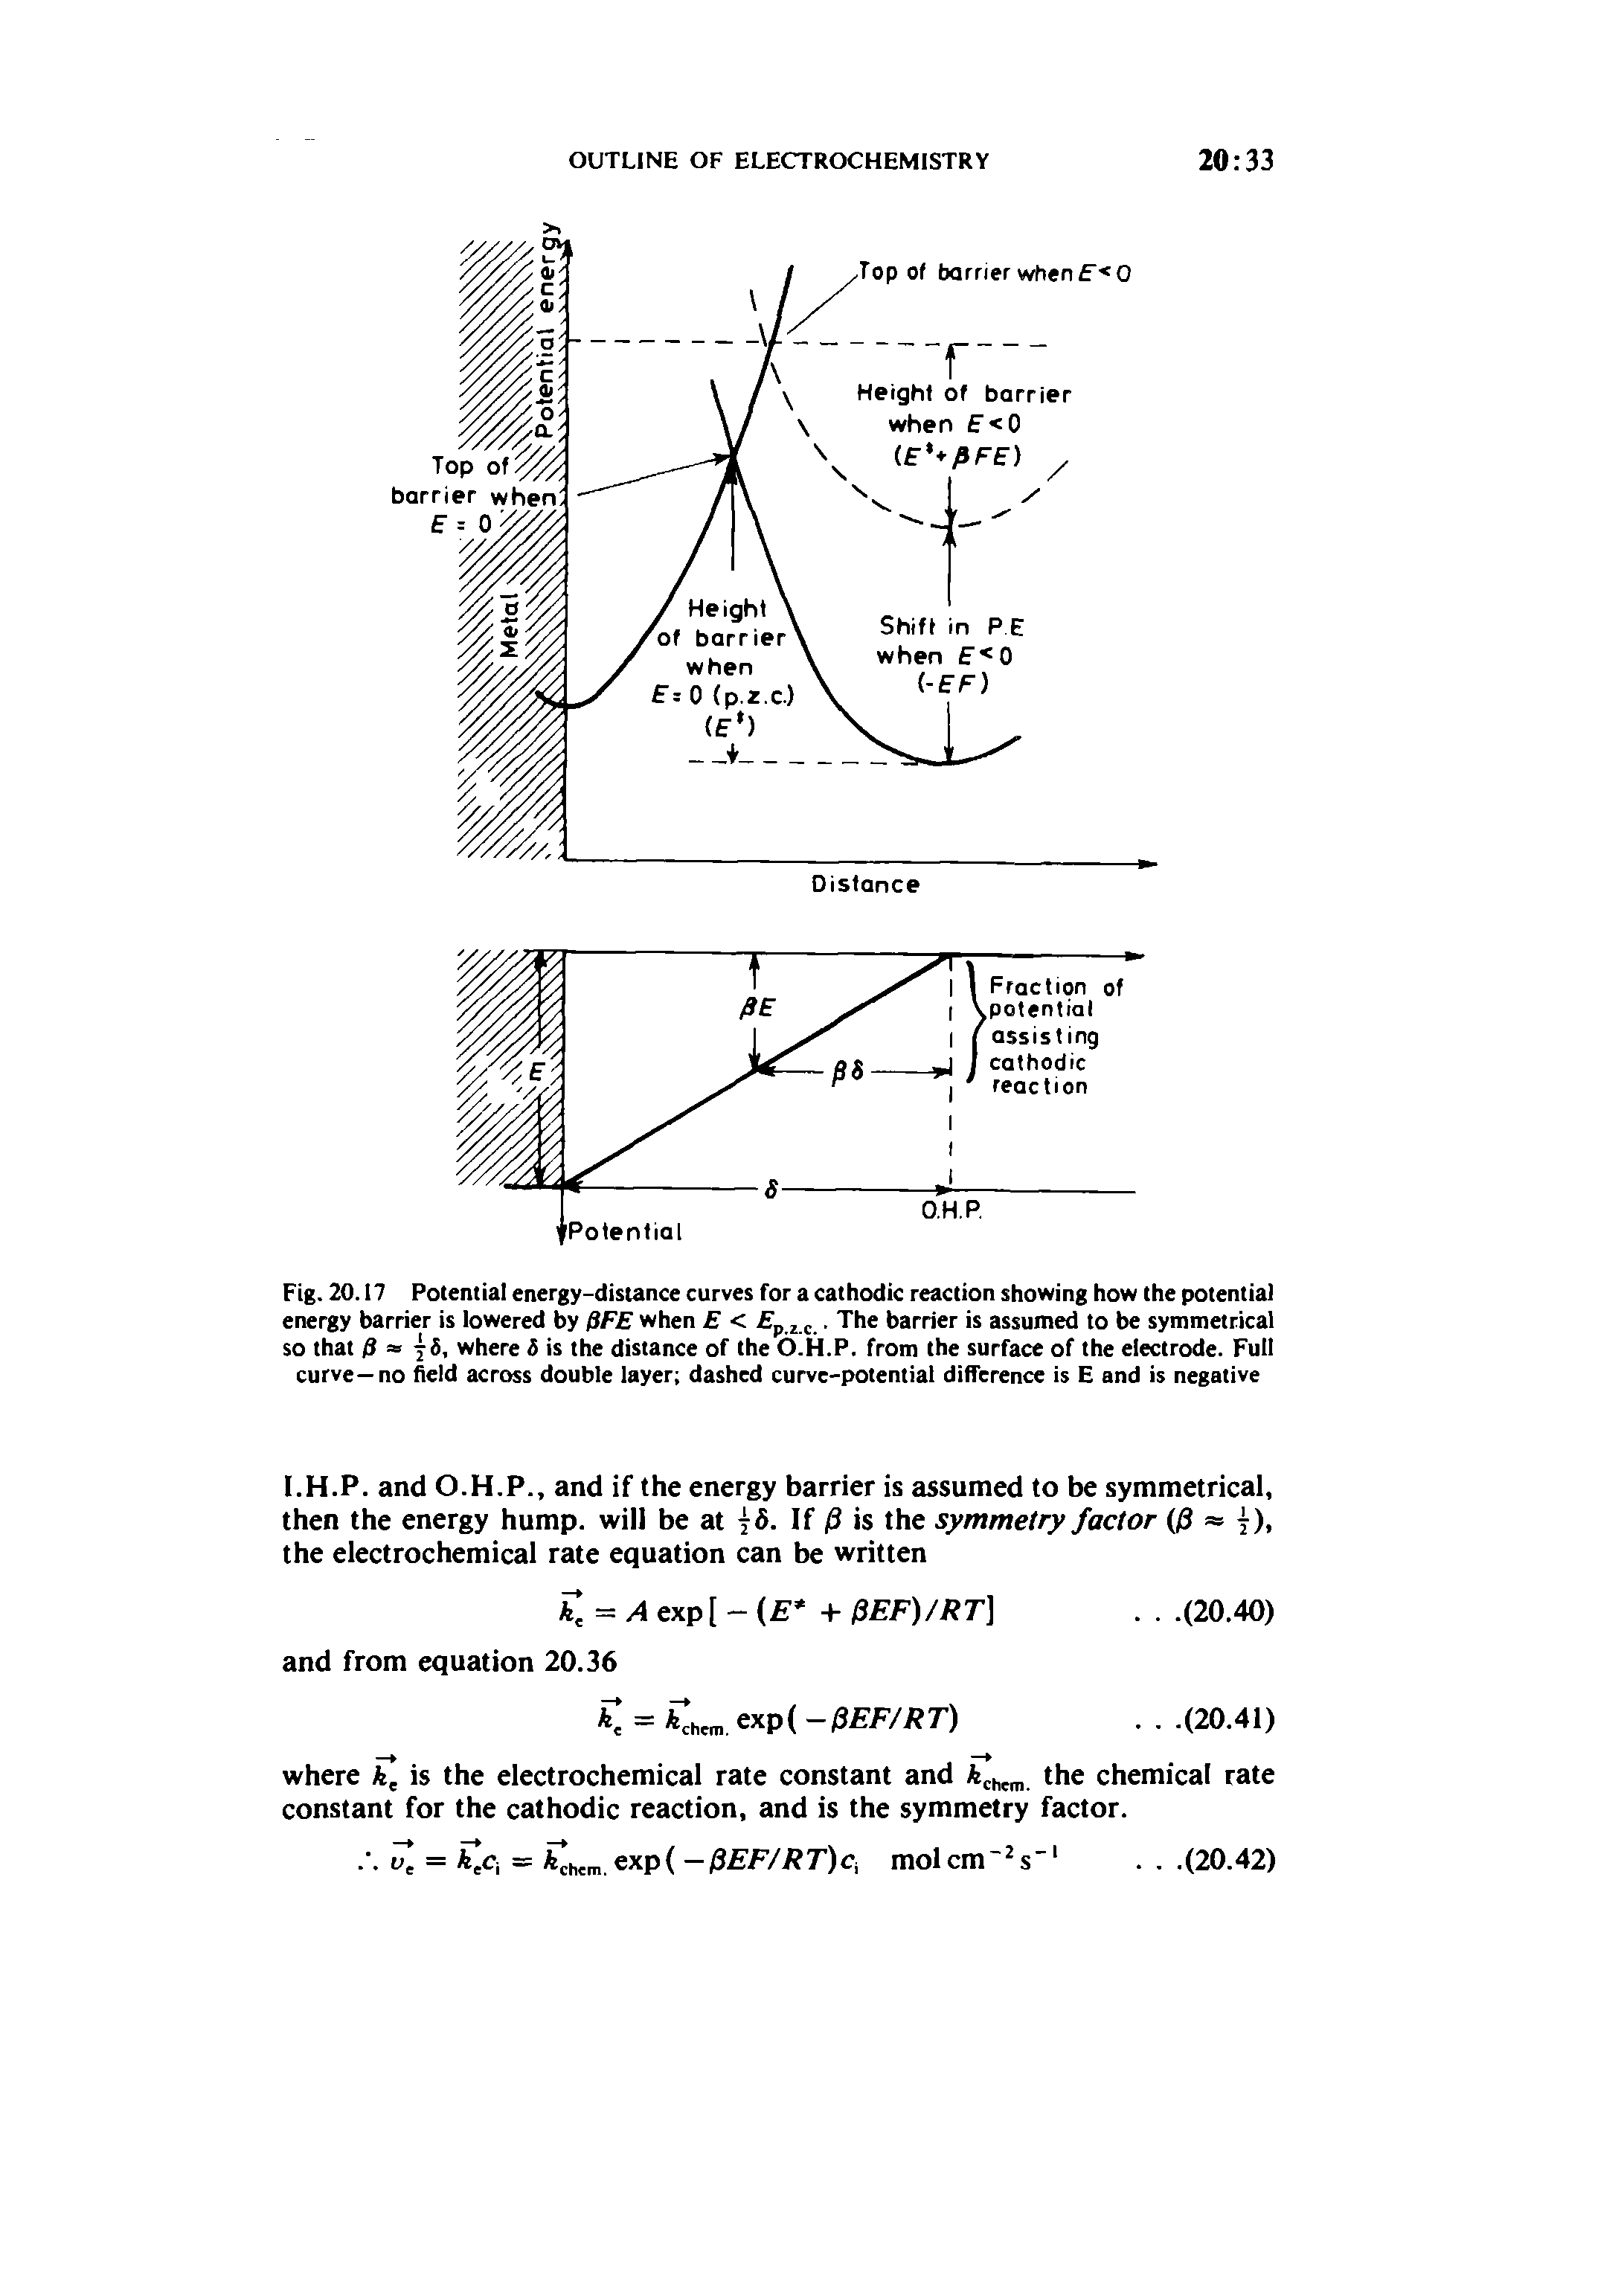 Fig. 20.17 Potential energy-distance curves for a cathodic reaction showing how the potential energy barrier is lowered by when E < p,z.c. The barrier is assumed to be symmetrical so that /S => yi, where 5 is the distance of the O.H.P. from the surface of the electrode. Full curve—no field across double layer dashed curve-potential diflcrence is E and is negative...